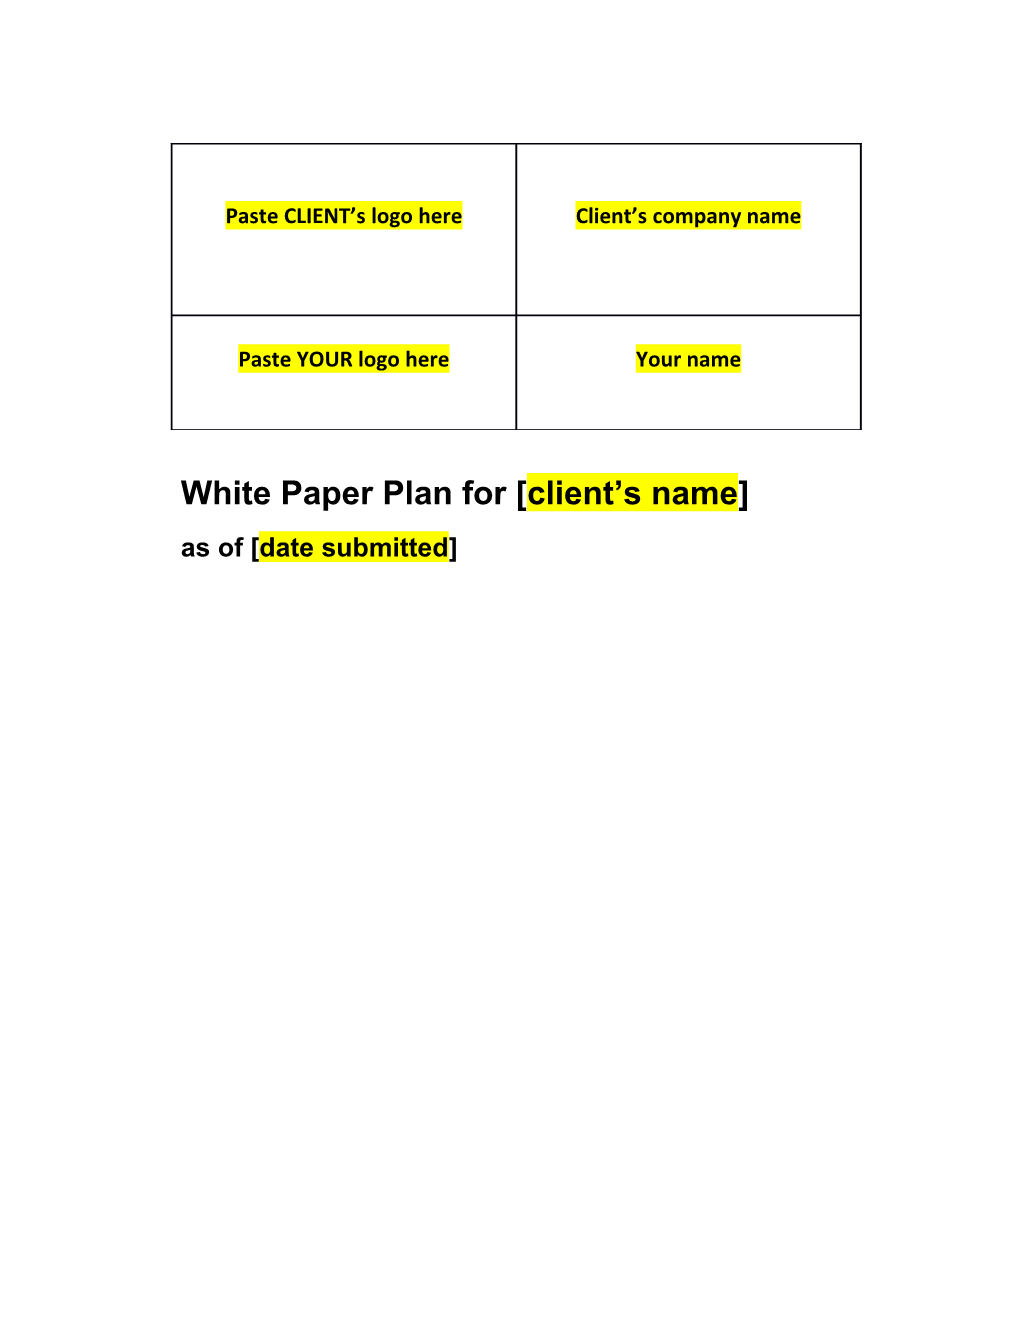 White Paper Plan for Client S Name